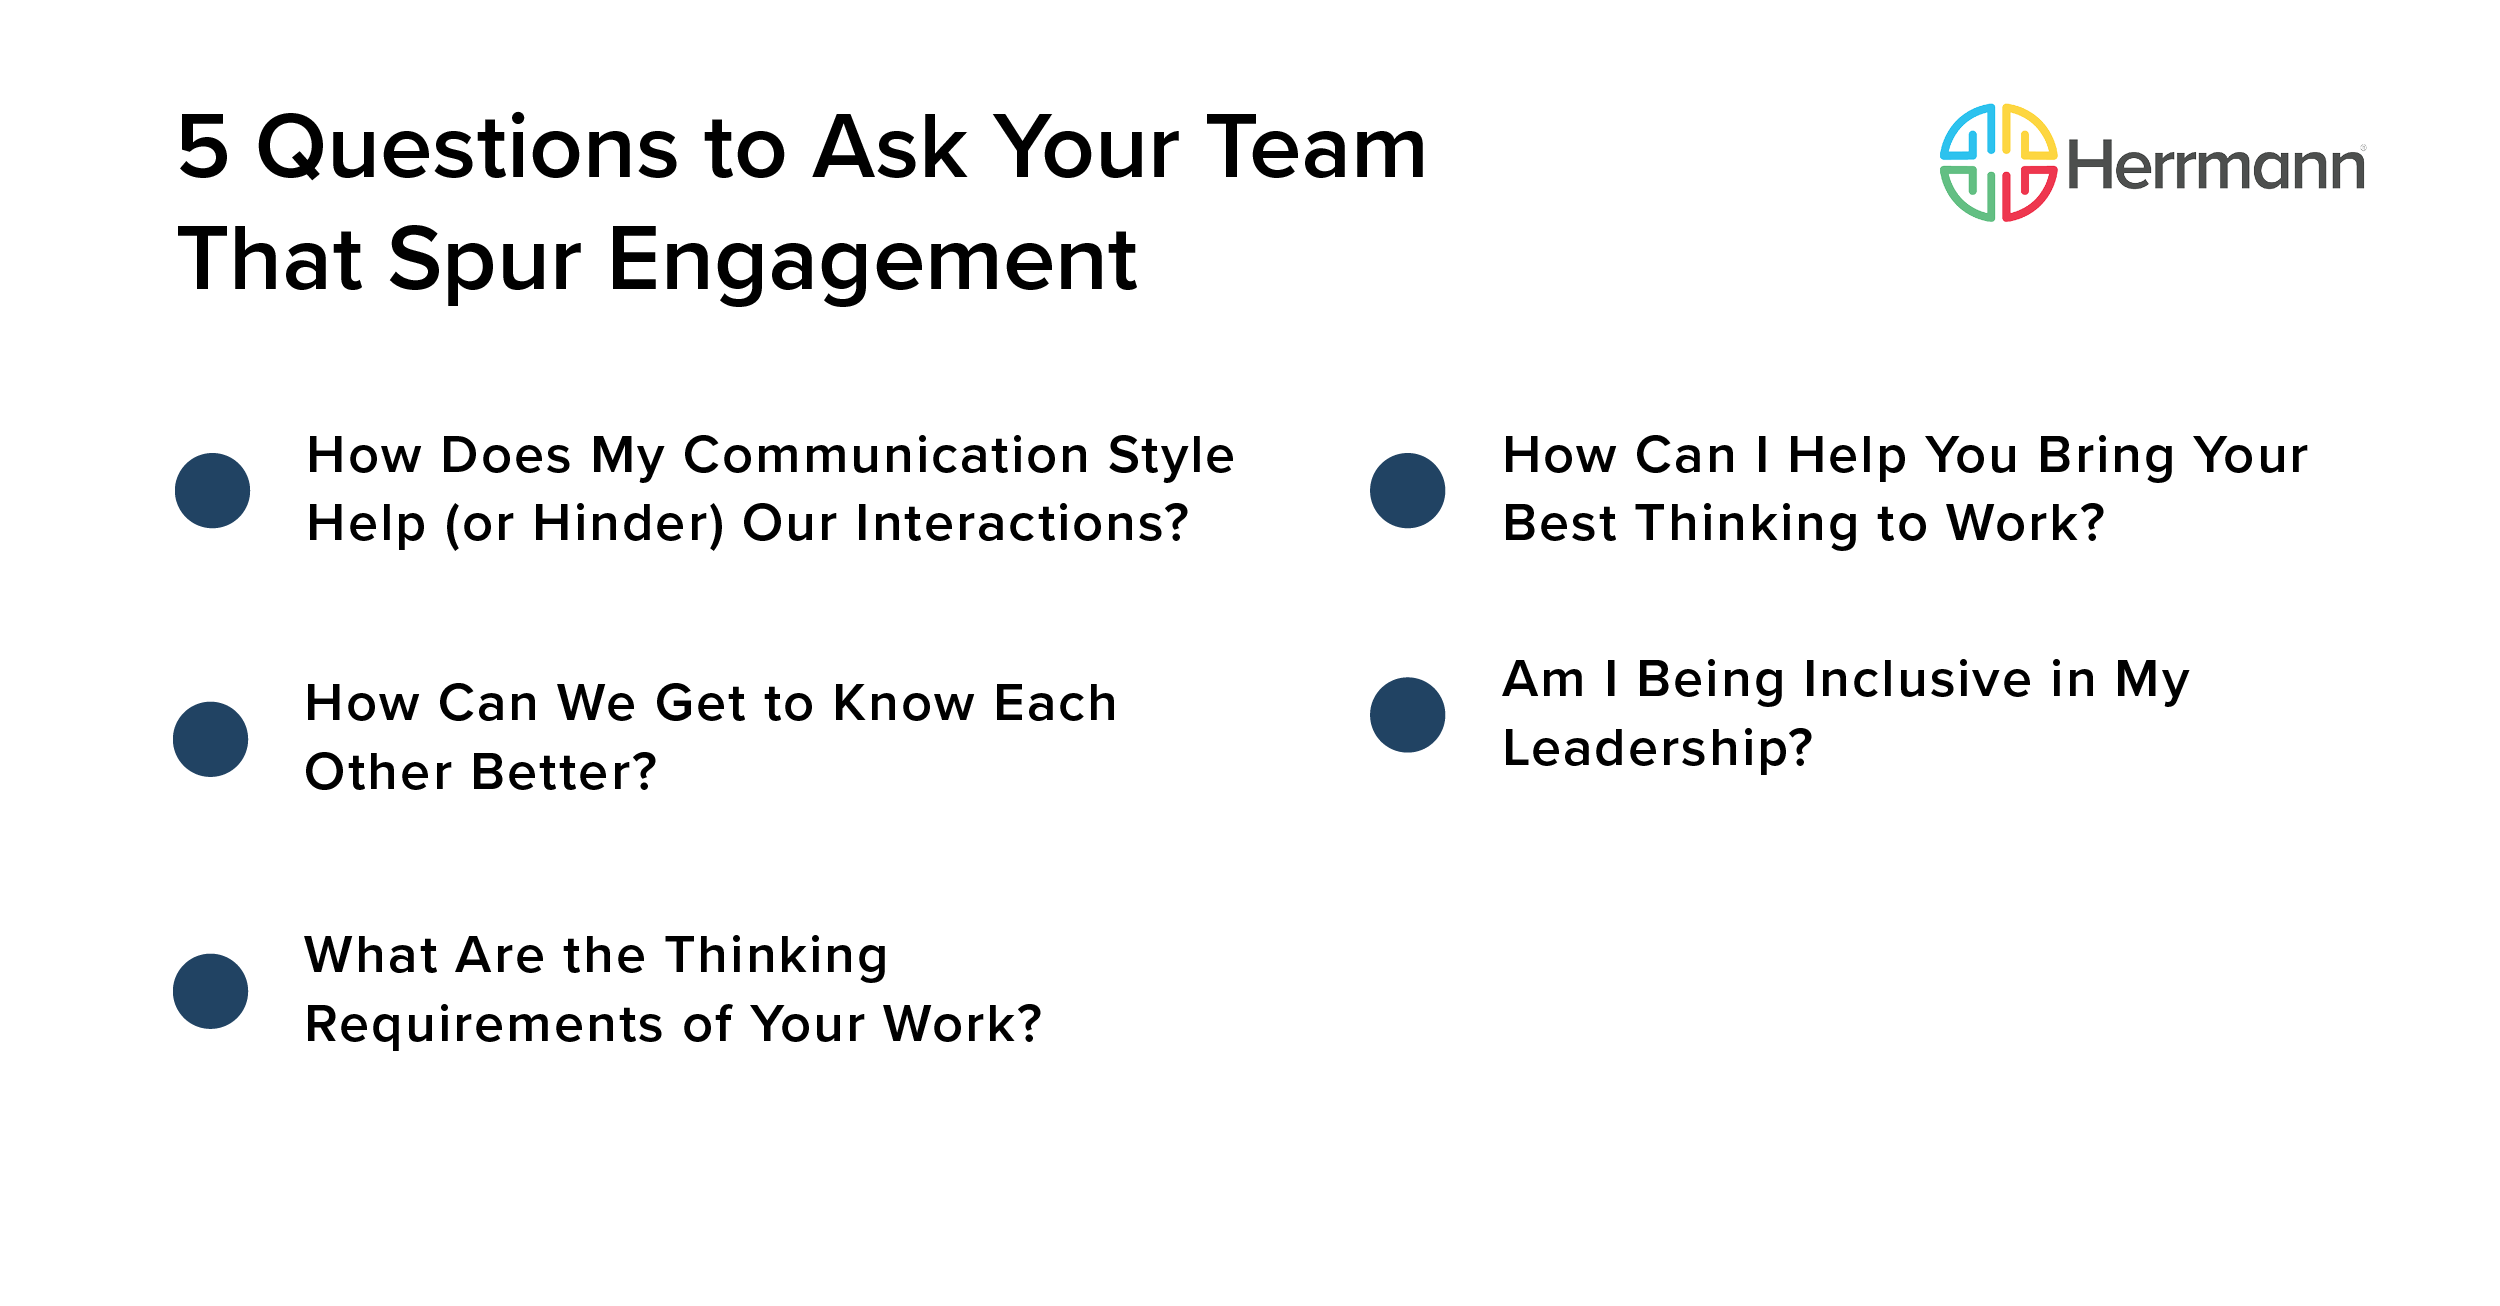 5 Questions to Ask Your Team That Spur Engagement